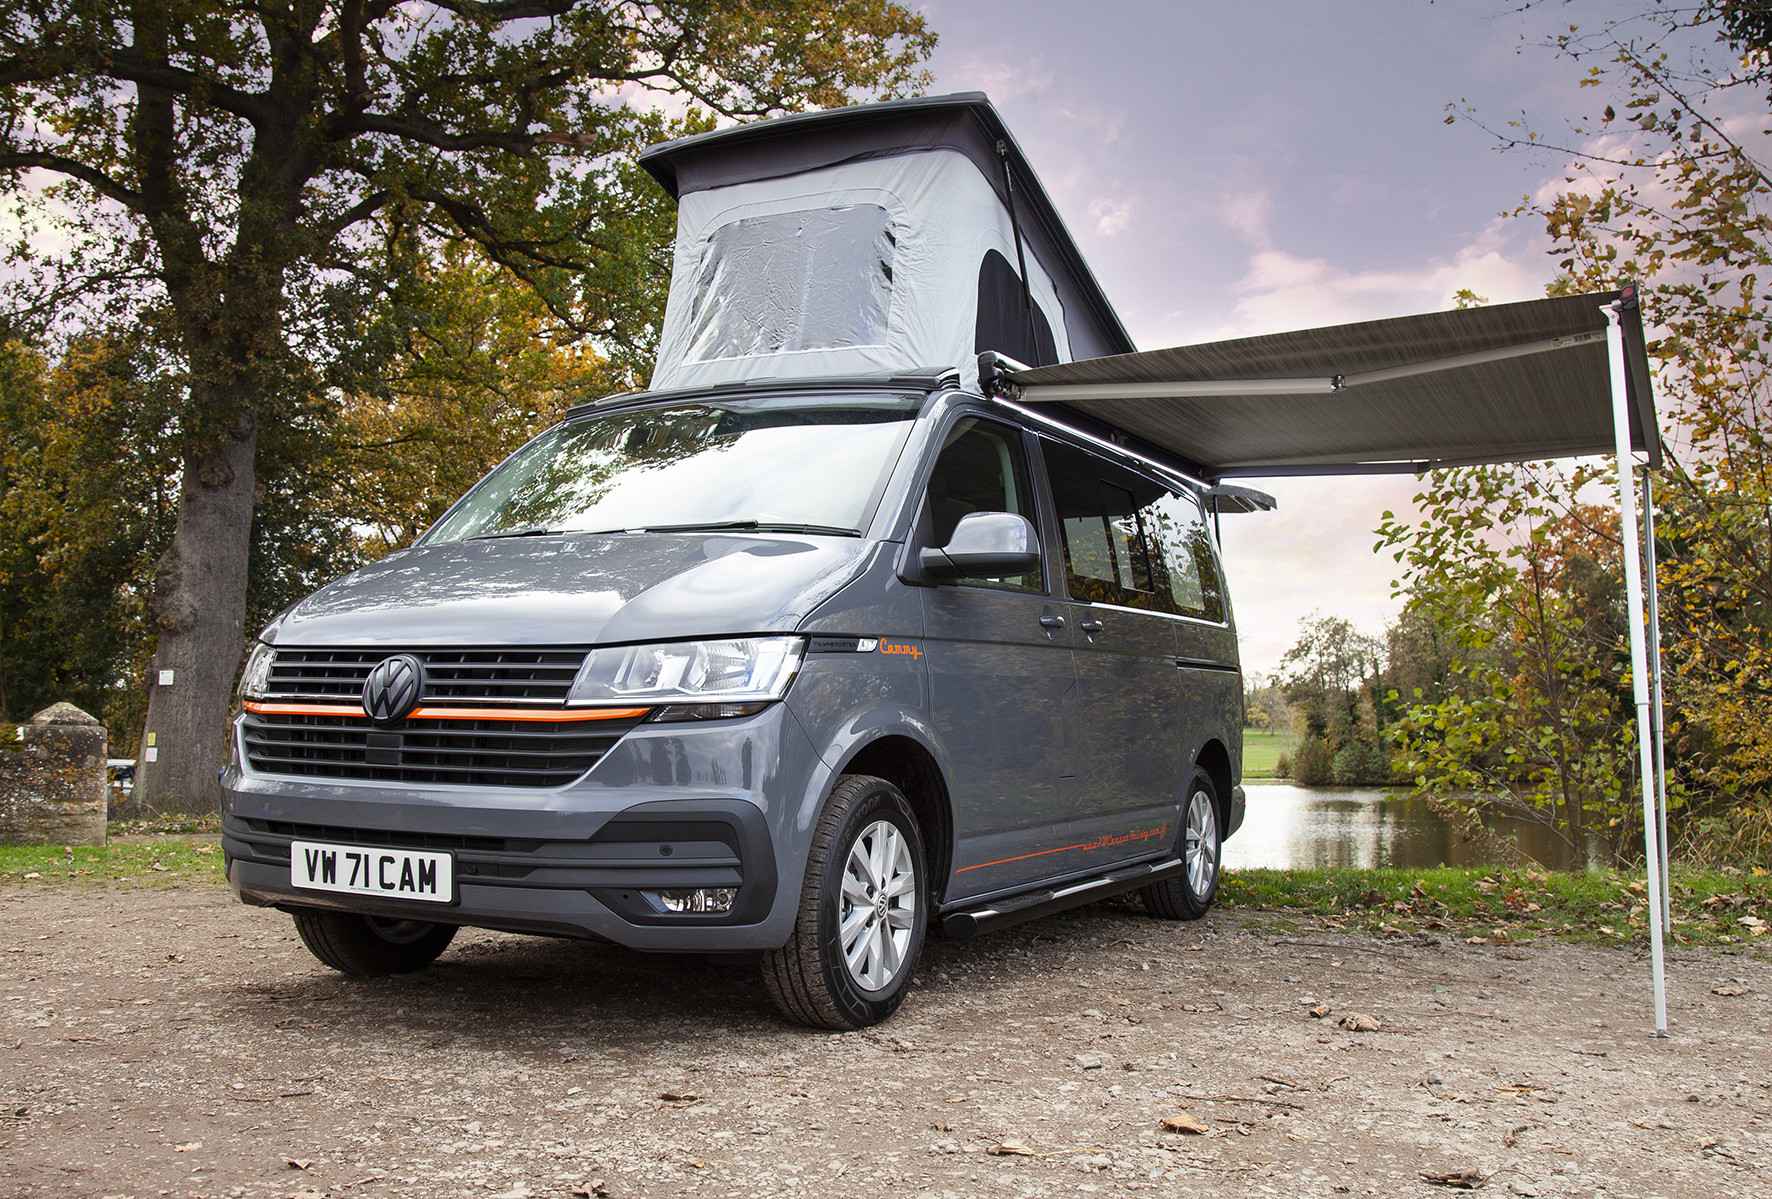 A VW T6 Campervan called Cammy-T and for hire in Northampton, England